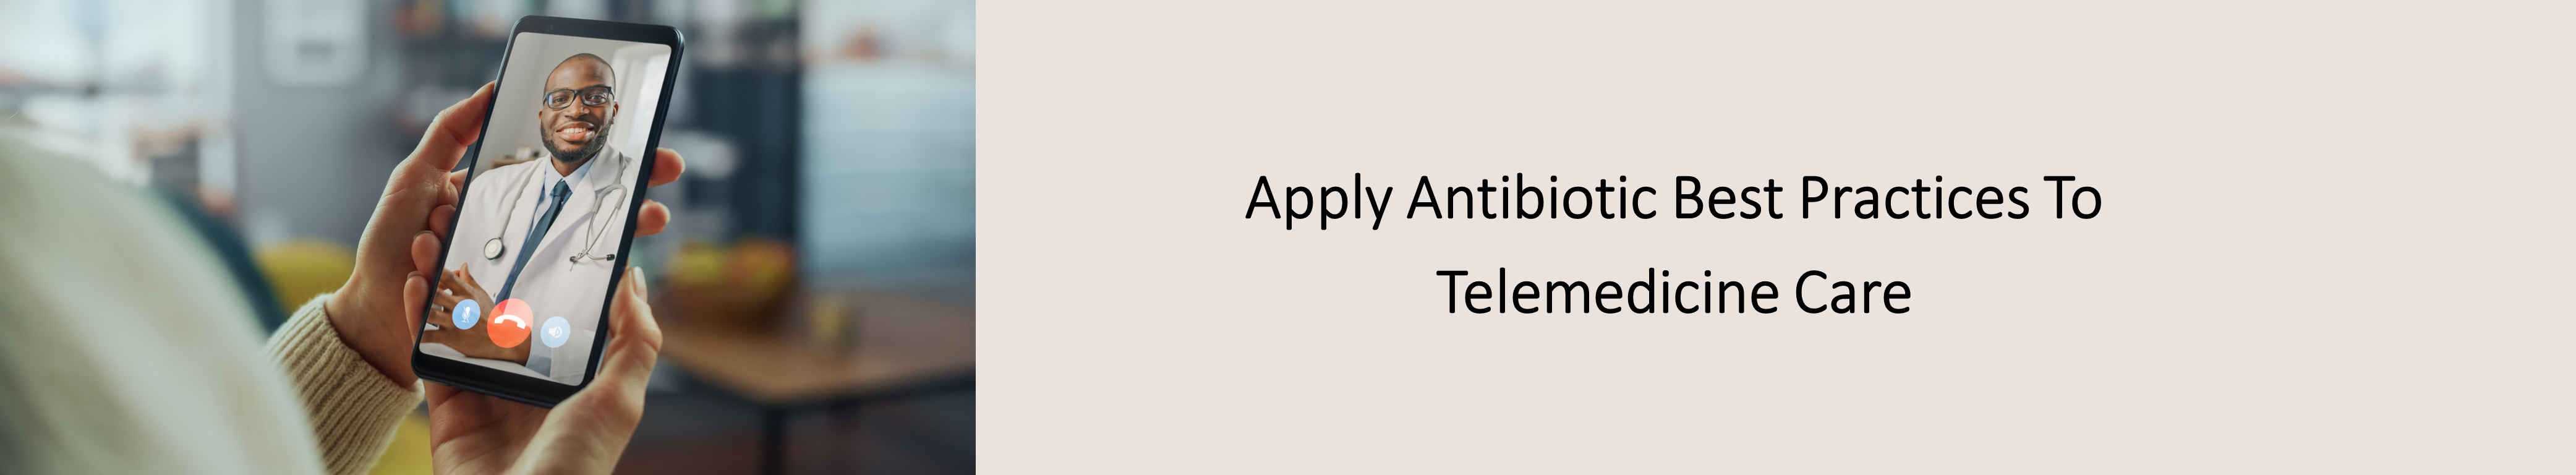 Apply antibiotic best practices to telemedicine care banner. Image of a healthcare provider on a cell phone video call.